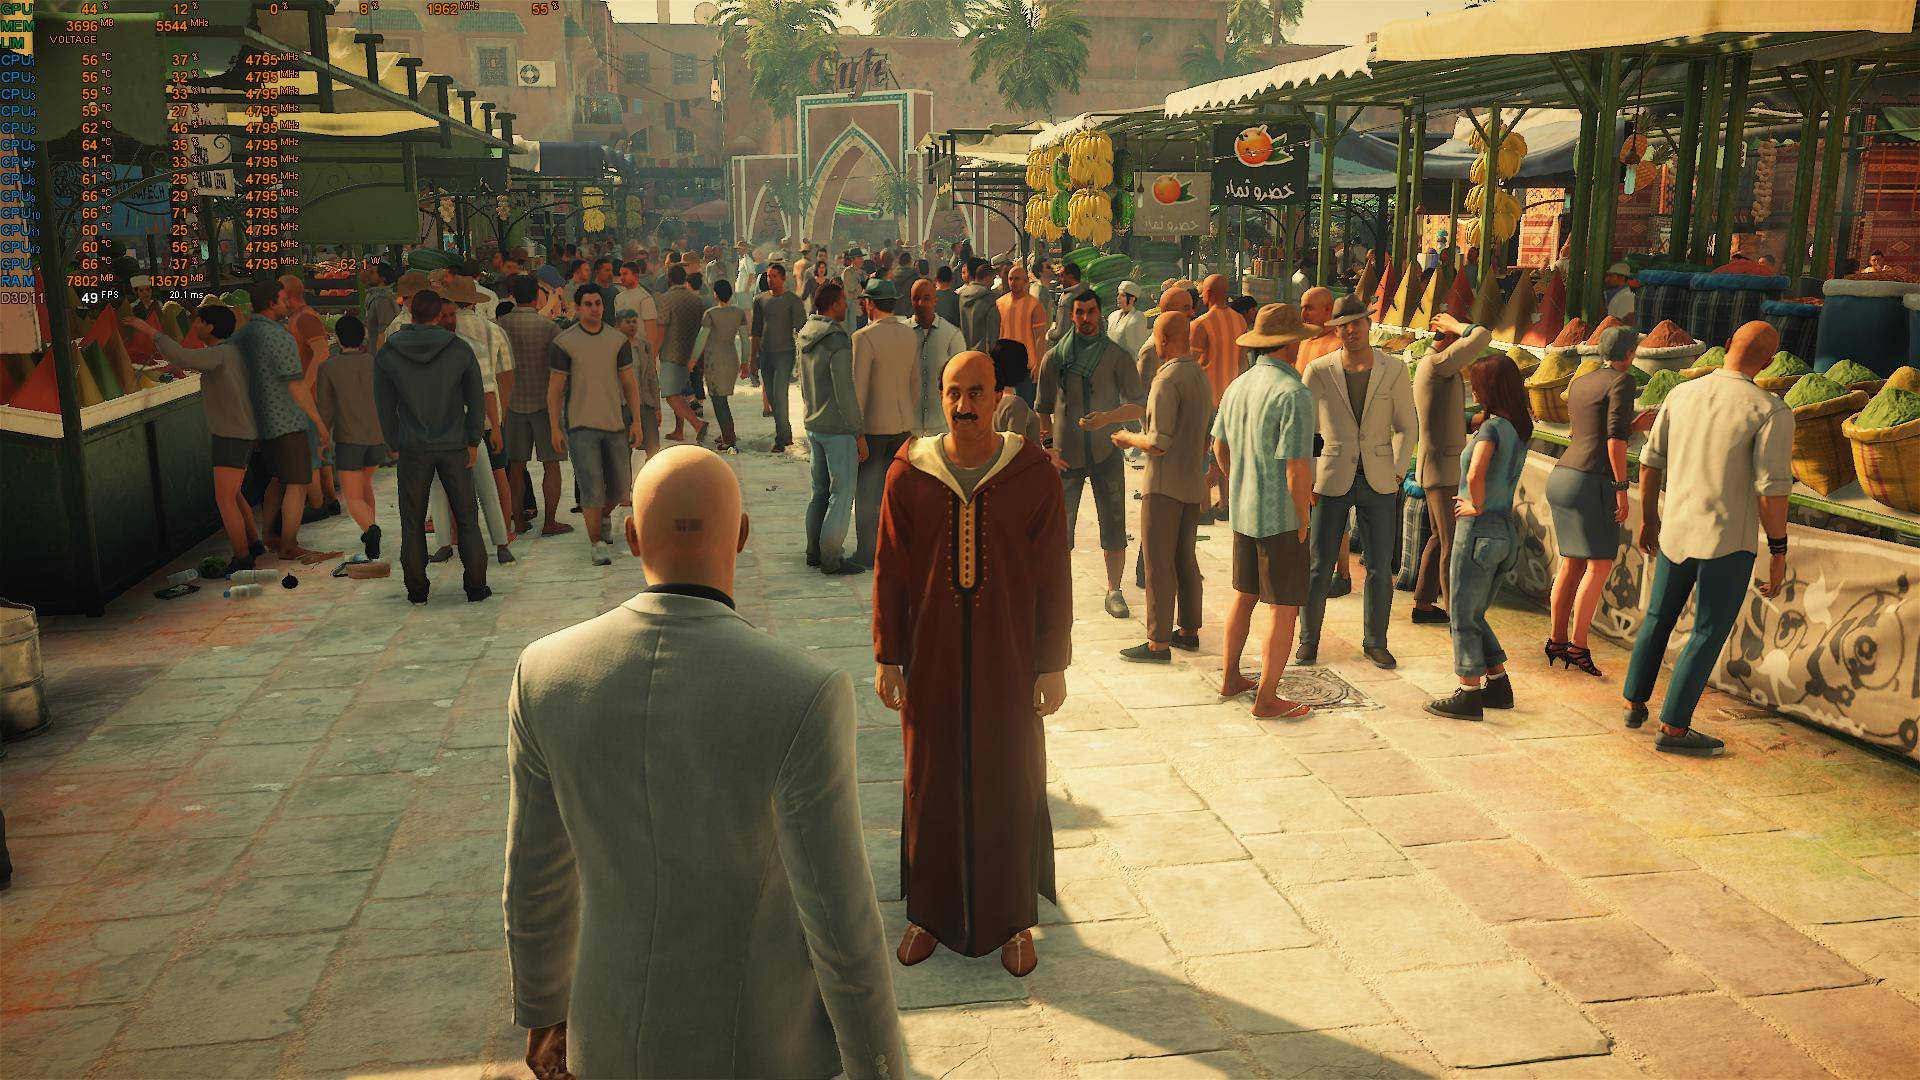 Agent 47 poised in bold stance in an exotic tropical setting of Hitman 2. Wallpaper